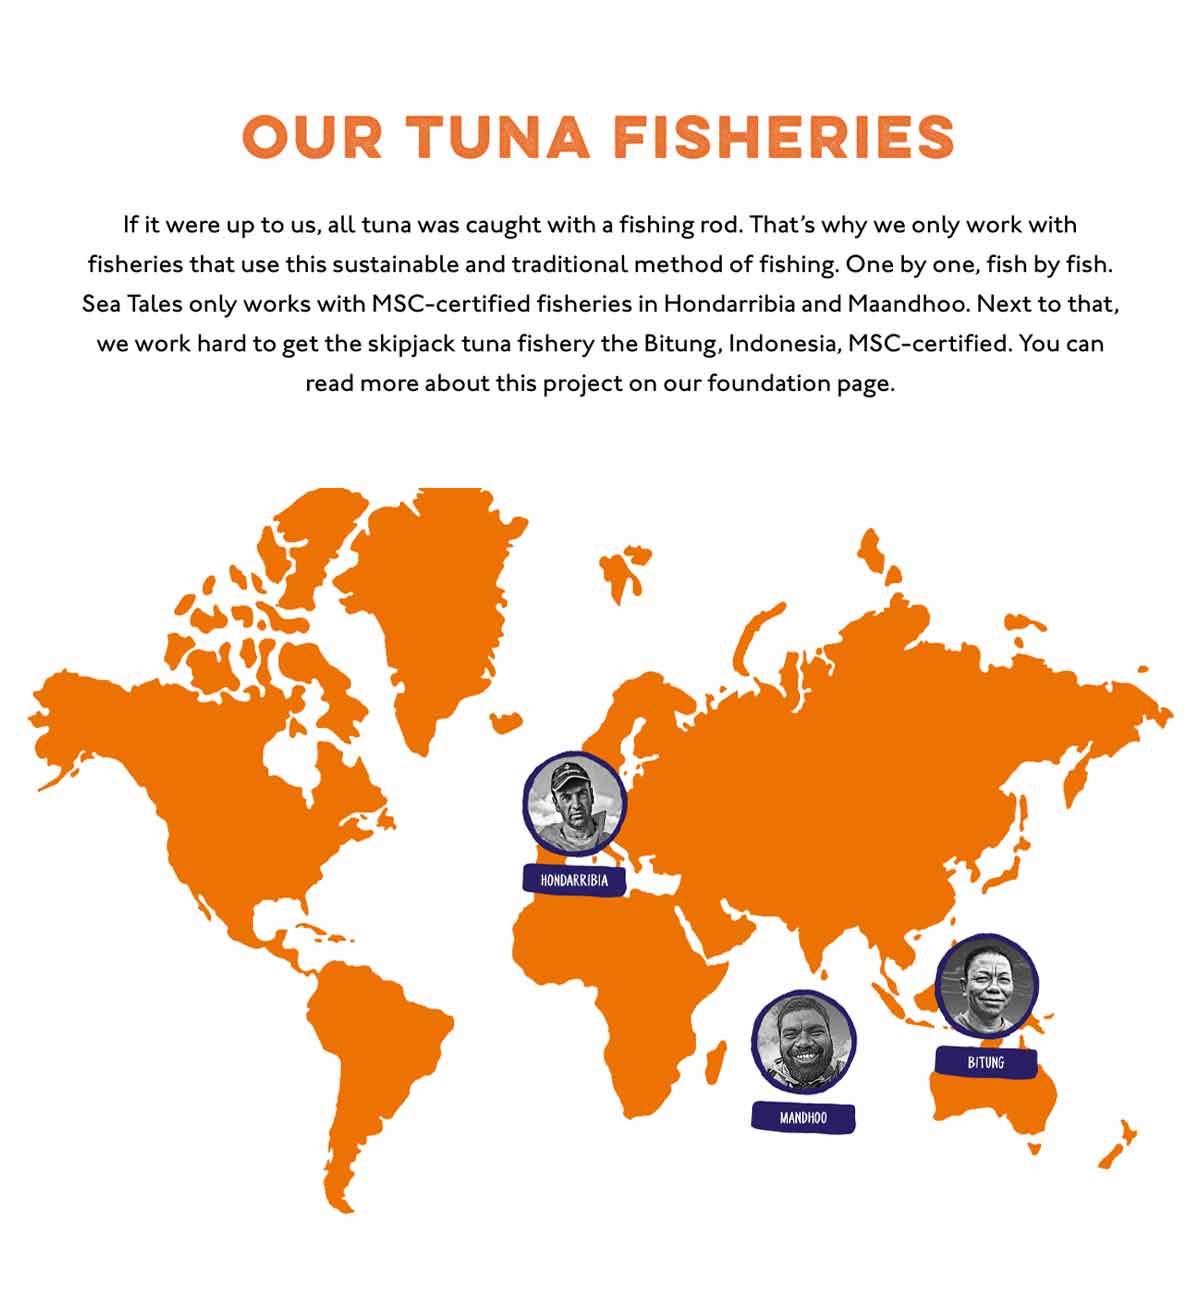 A map of tuna fisheries for Bart van Olphen's fishing company, Sea Tales.